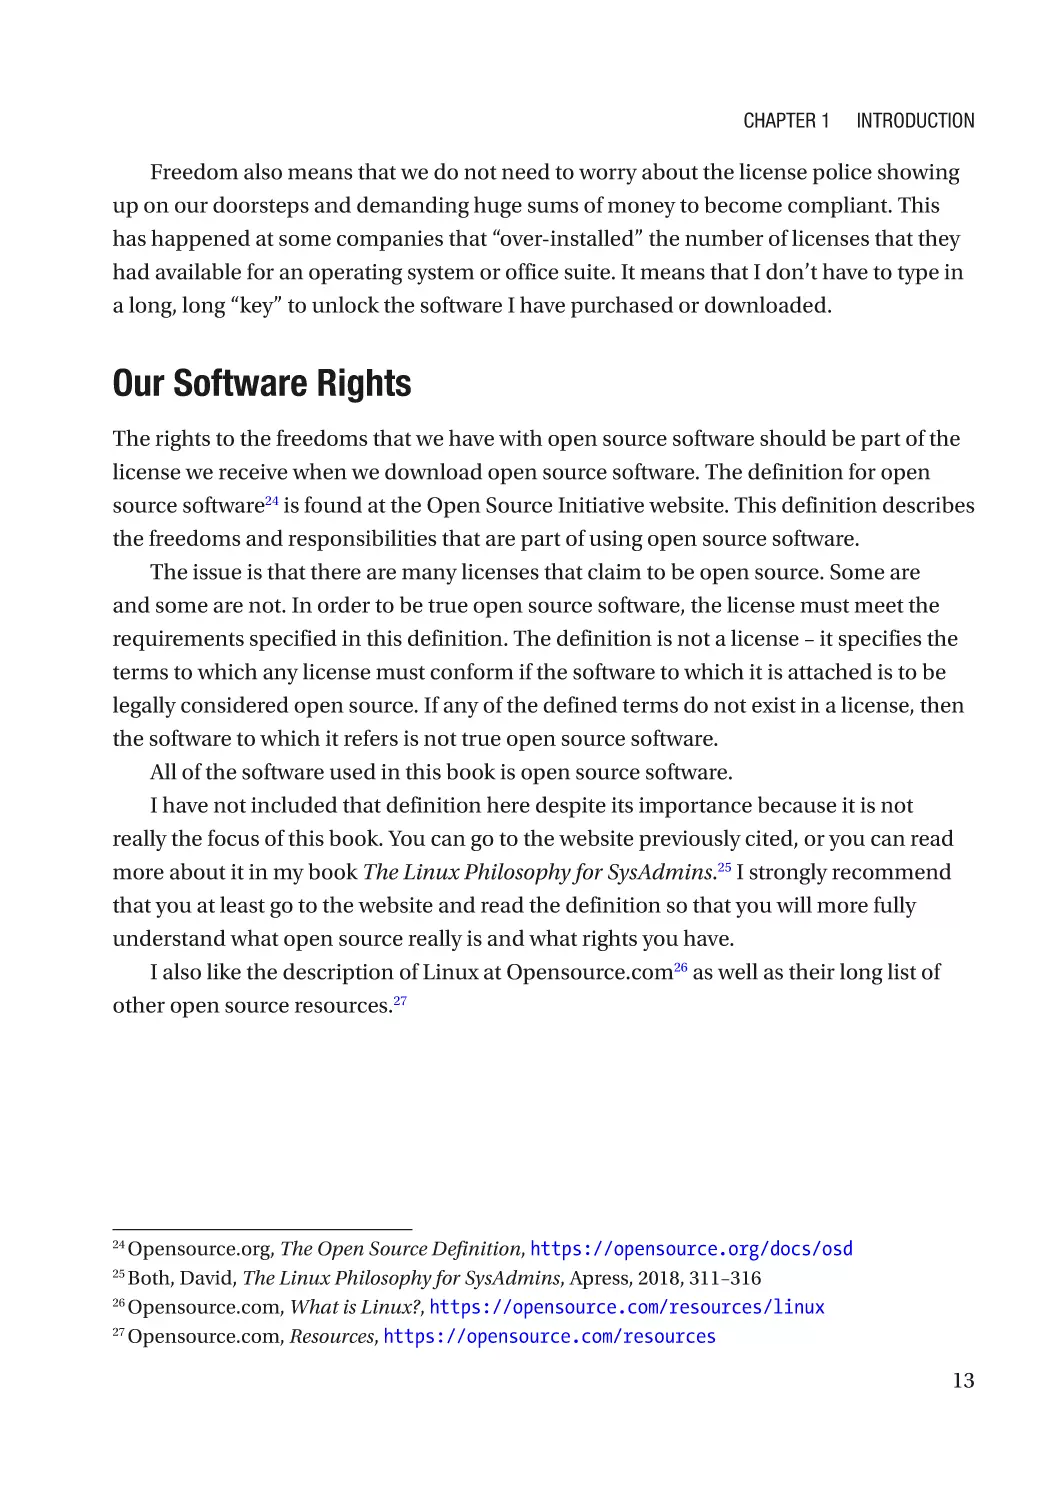 Our Software Rights